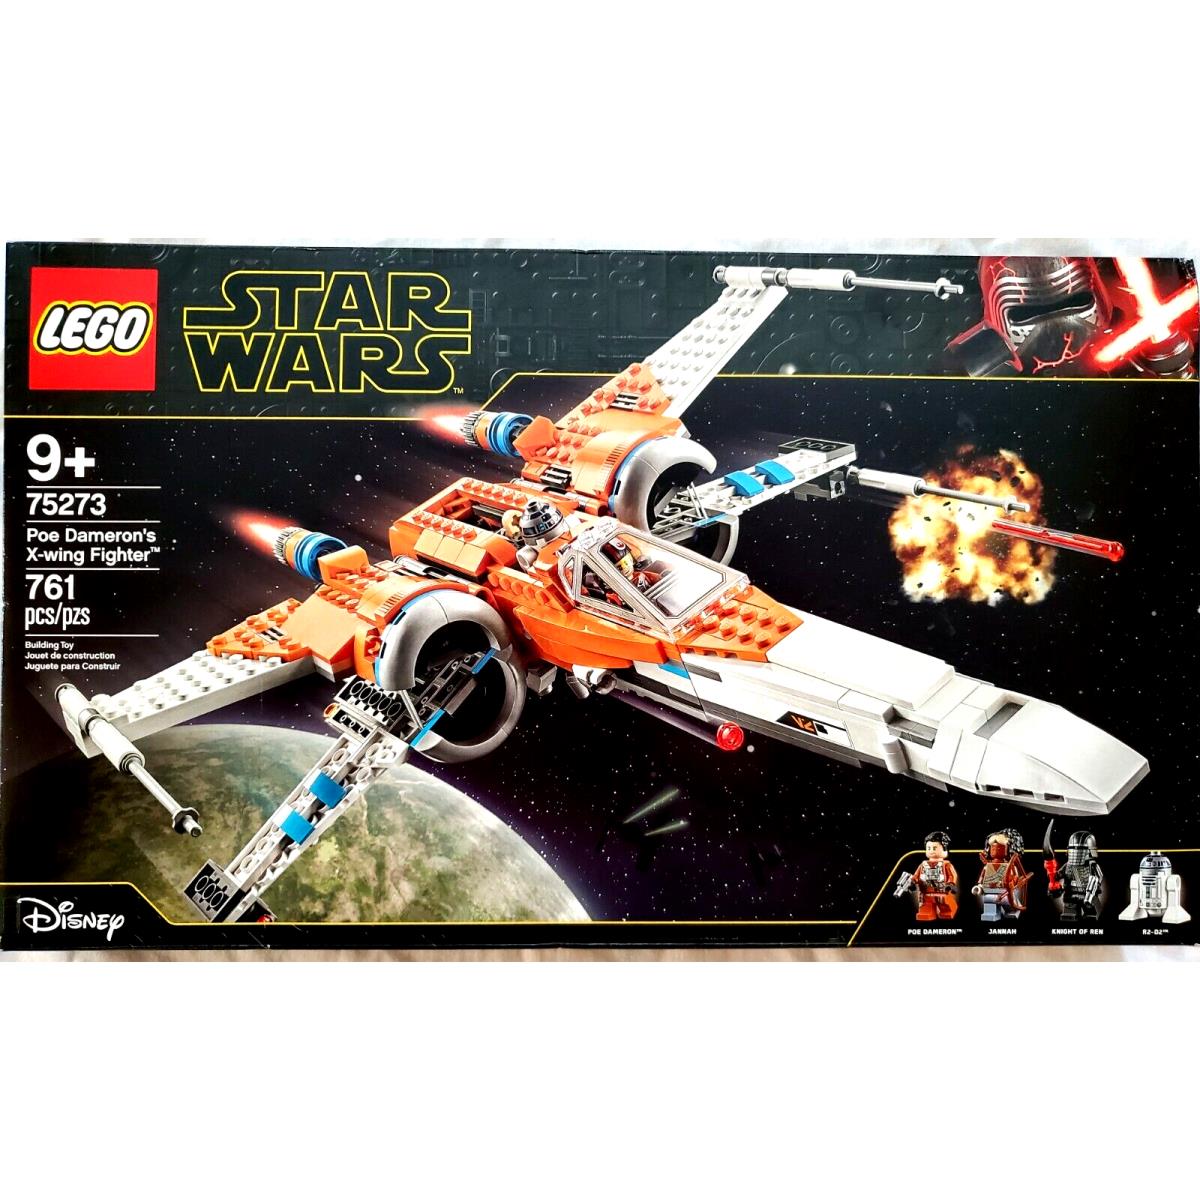 Lego Star Wars 75273 Poe Dameron`s X-wing Fighter Creased Box